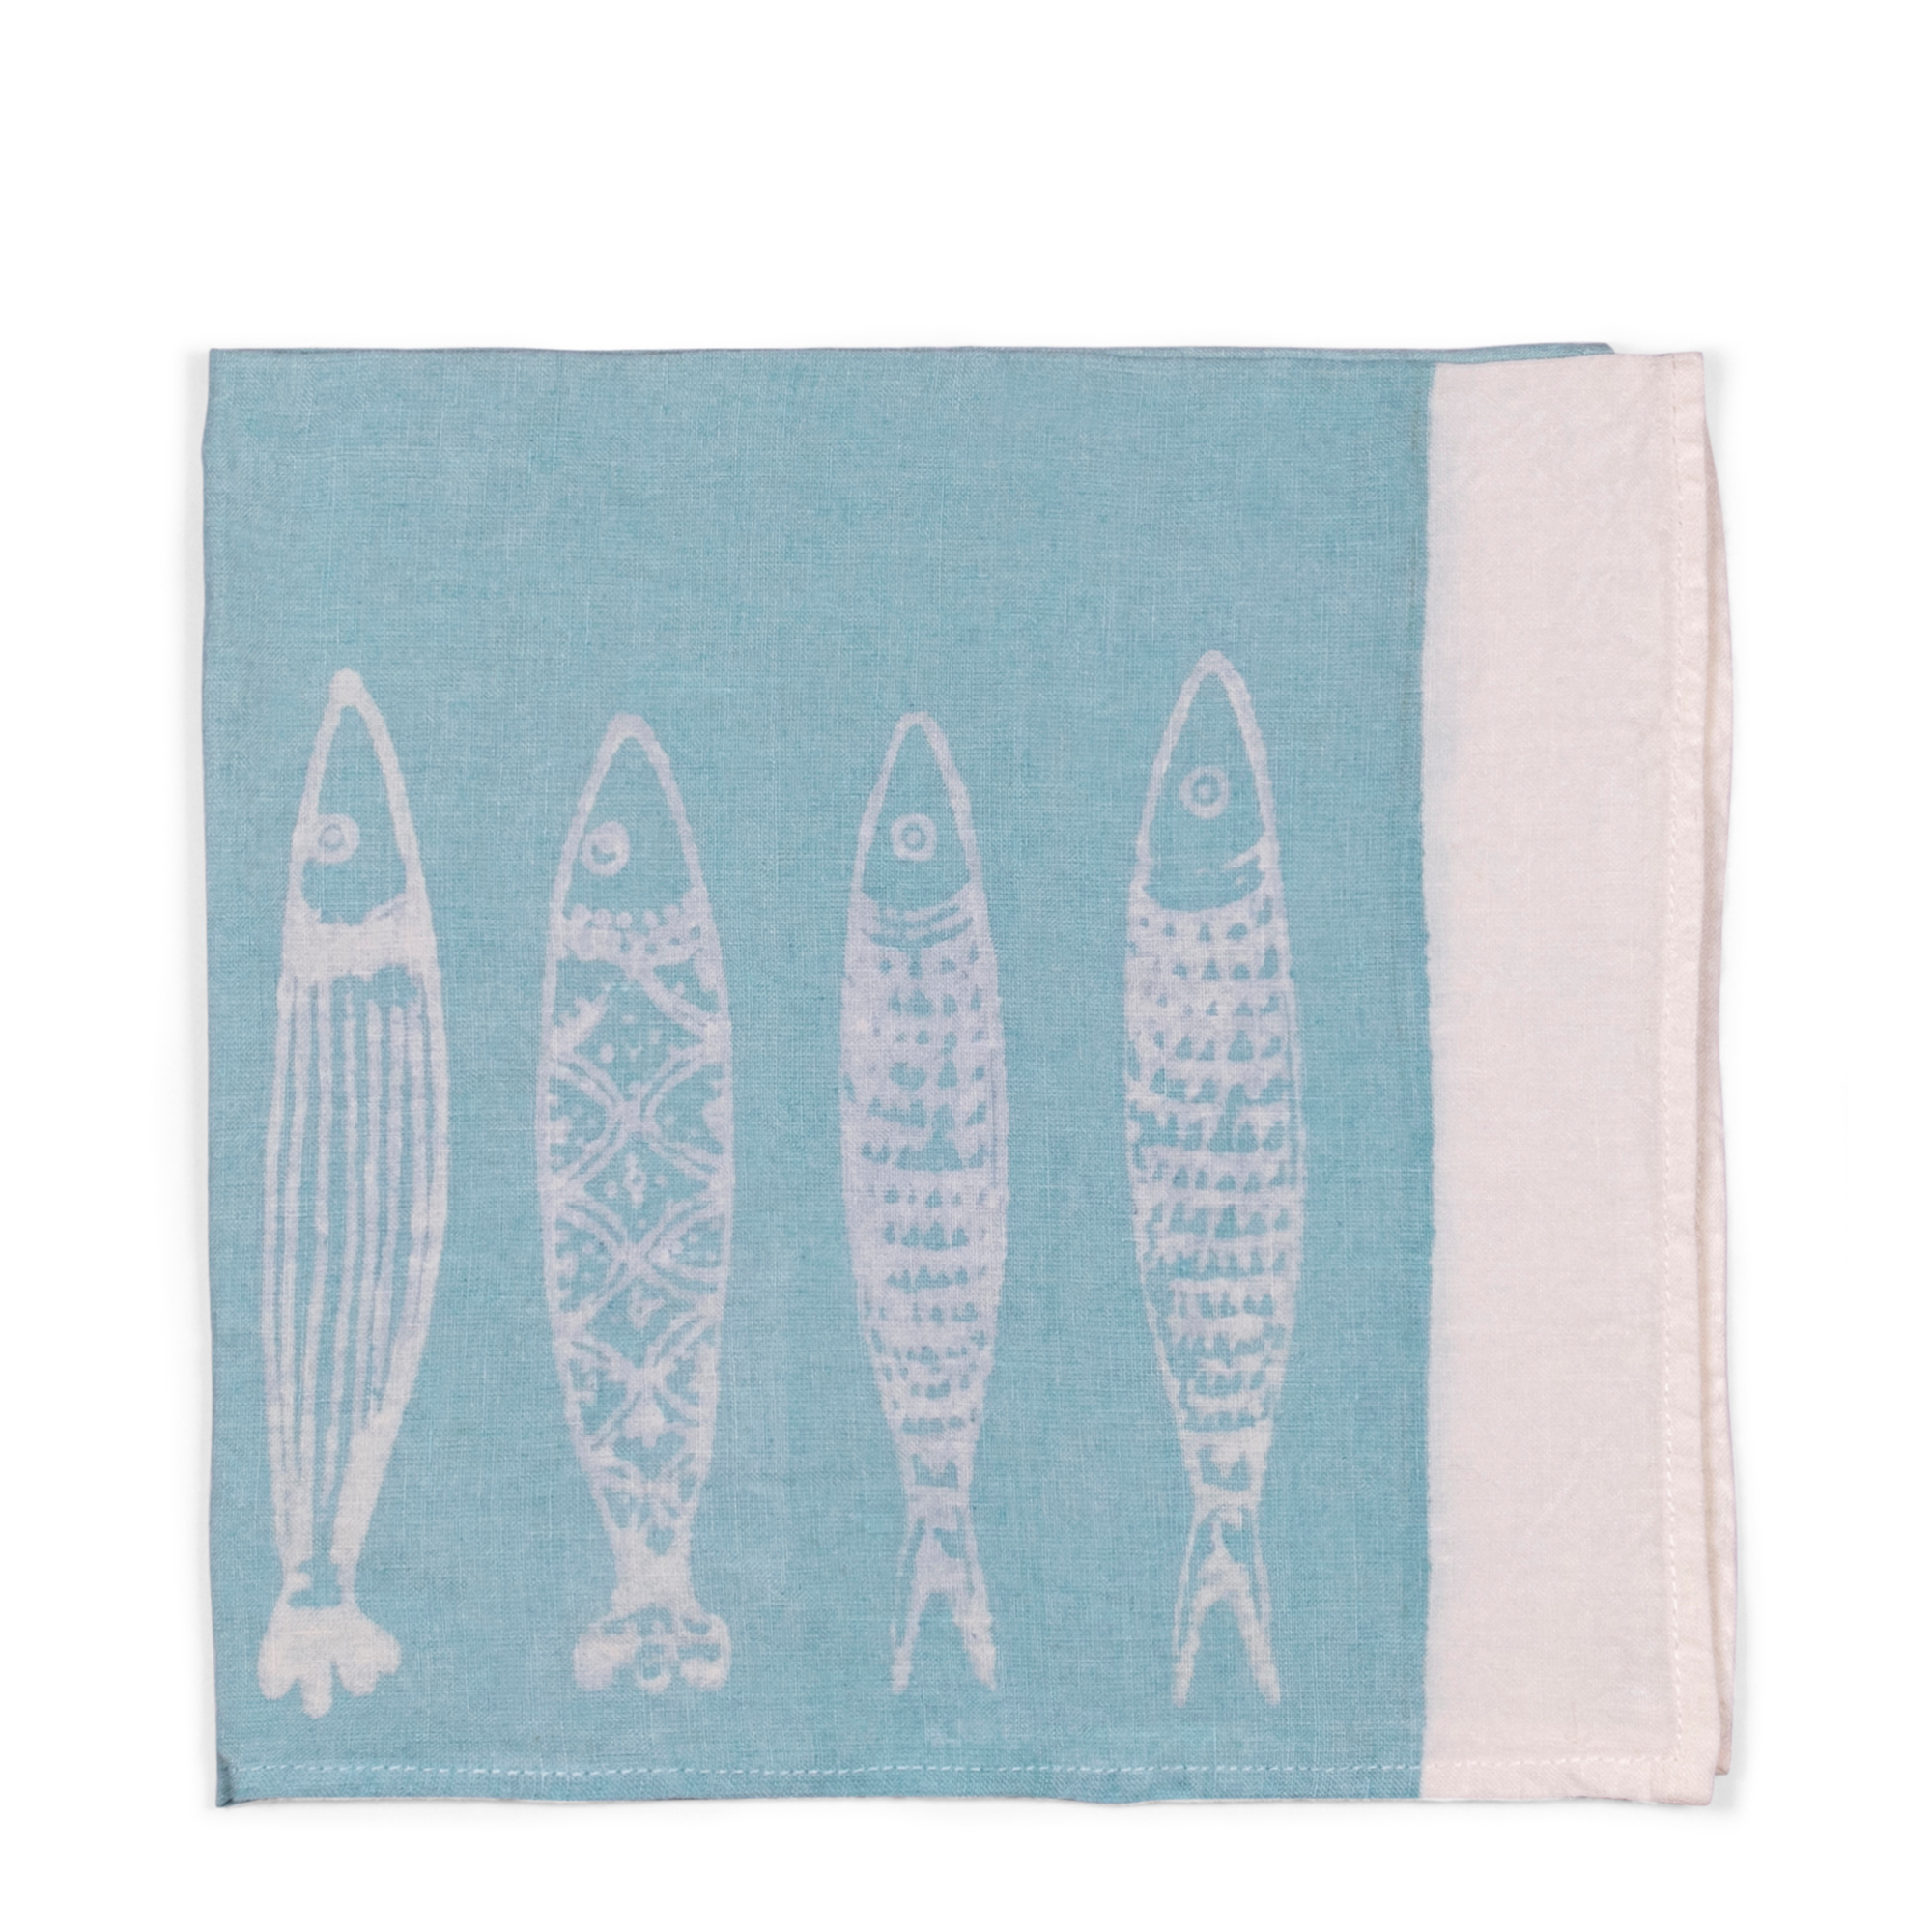 A stylish light blue linen napkin with white borders and illustrated fish, handmade using pear wood. Can be used for breakfast, formal dining, or garden tablescape.